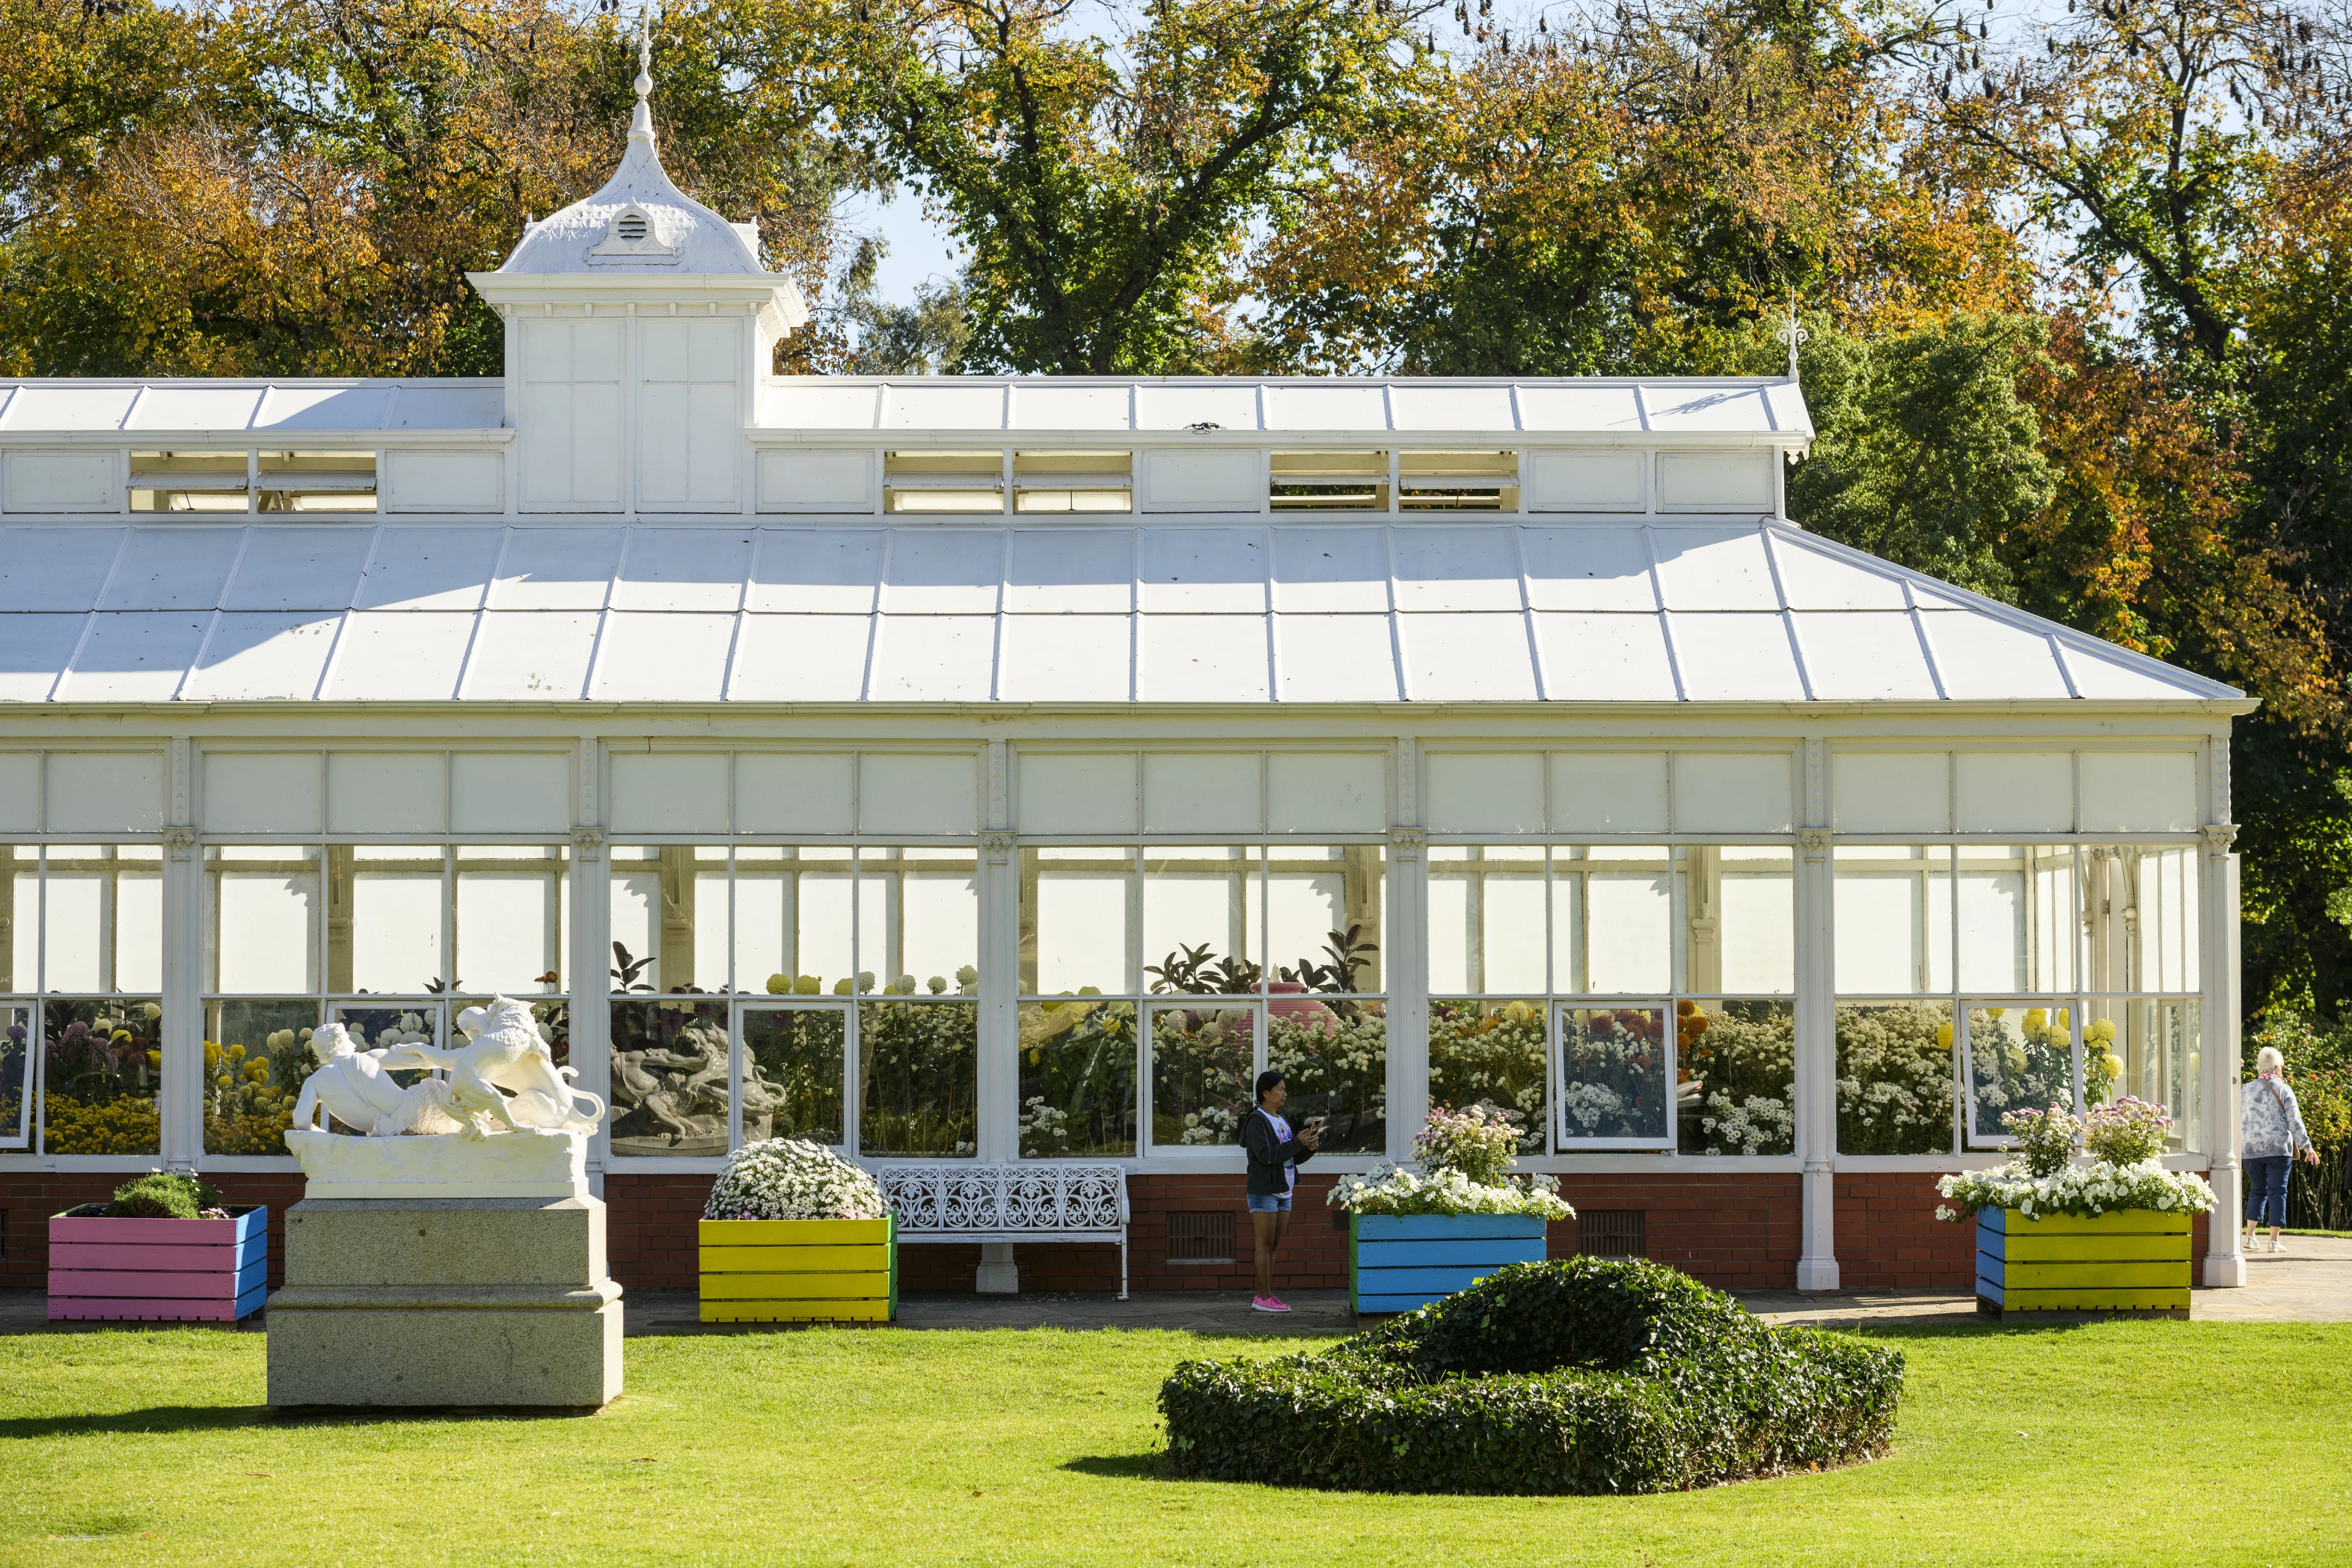 External view of the conservatory in Rosalind Park, Bendigo, Victoria.